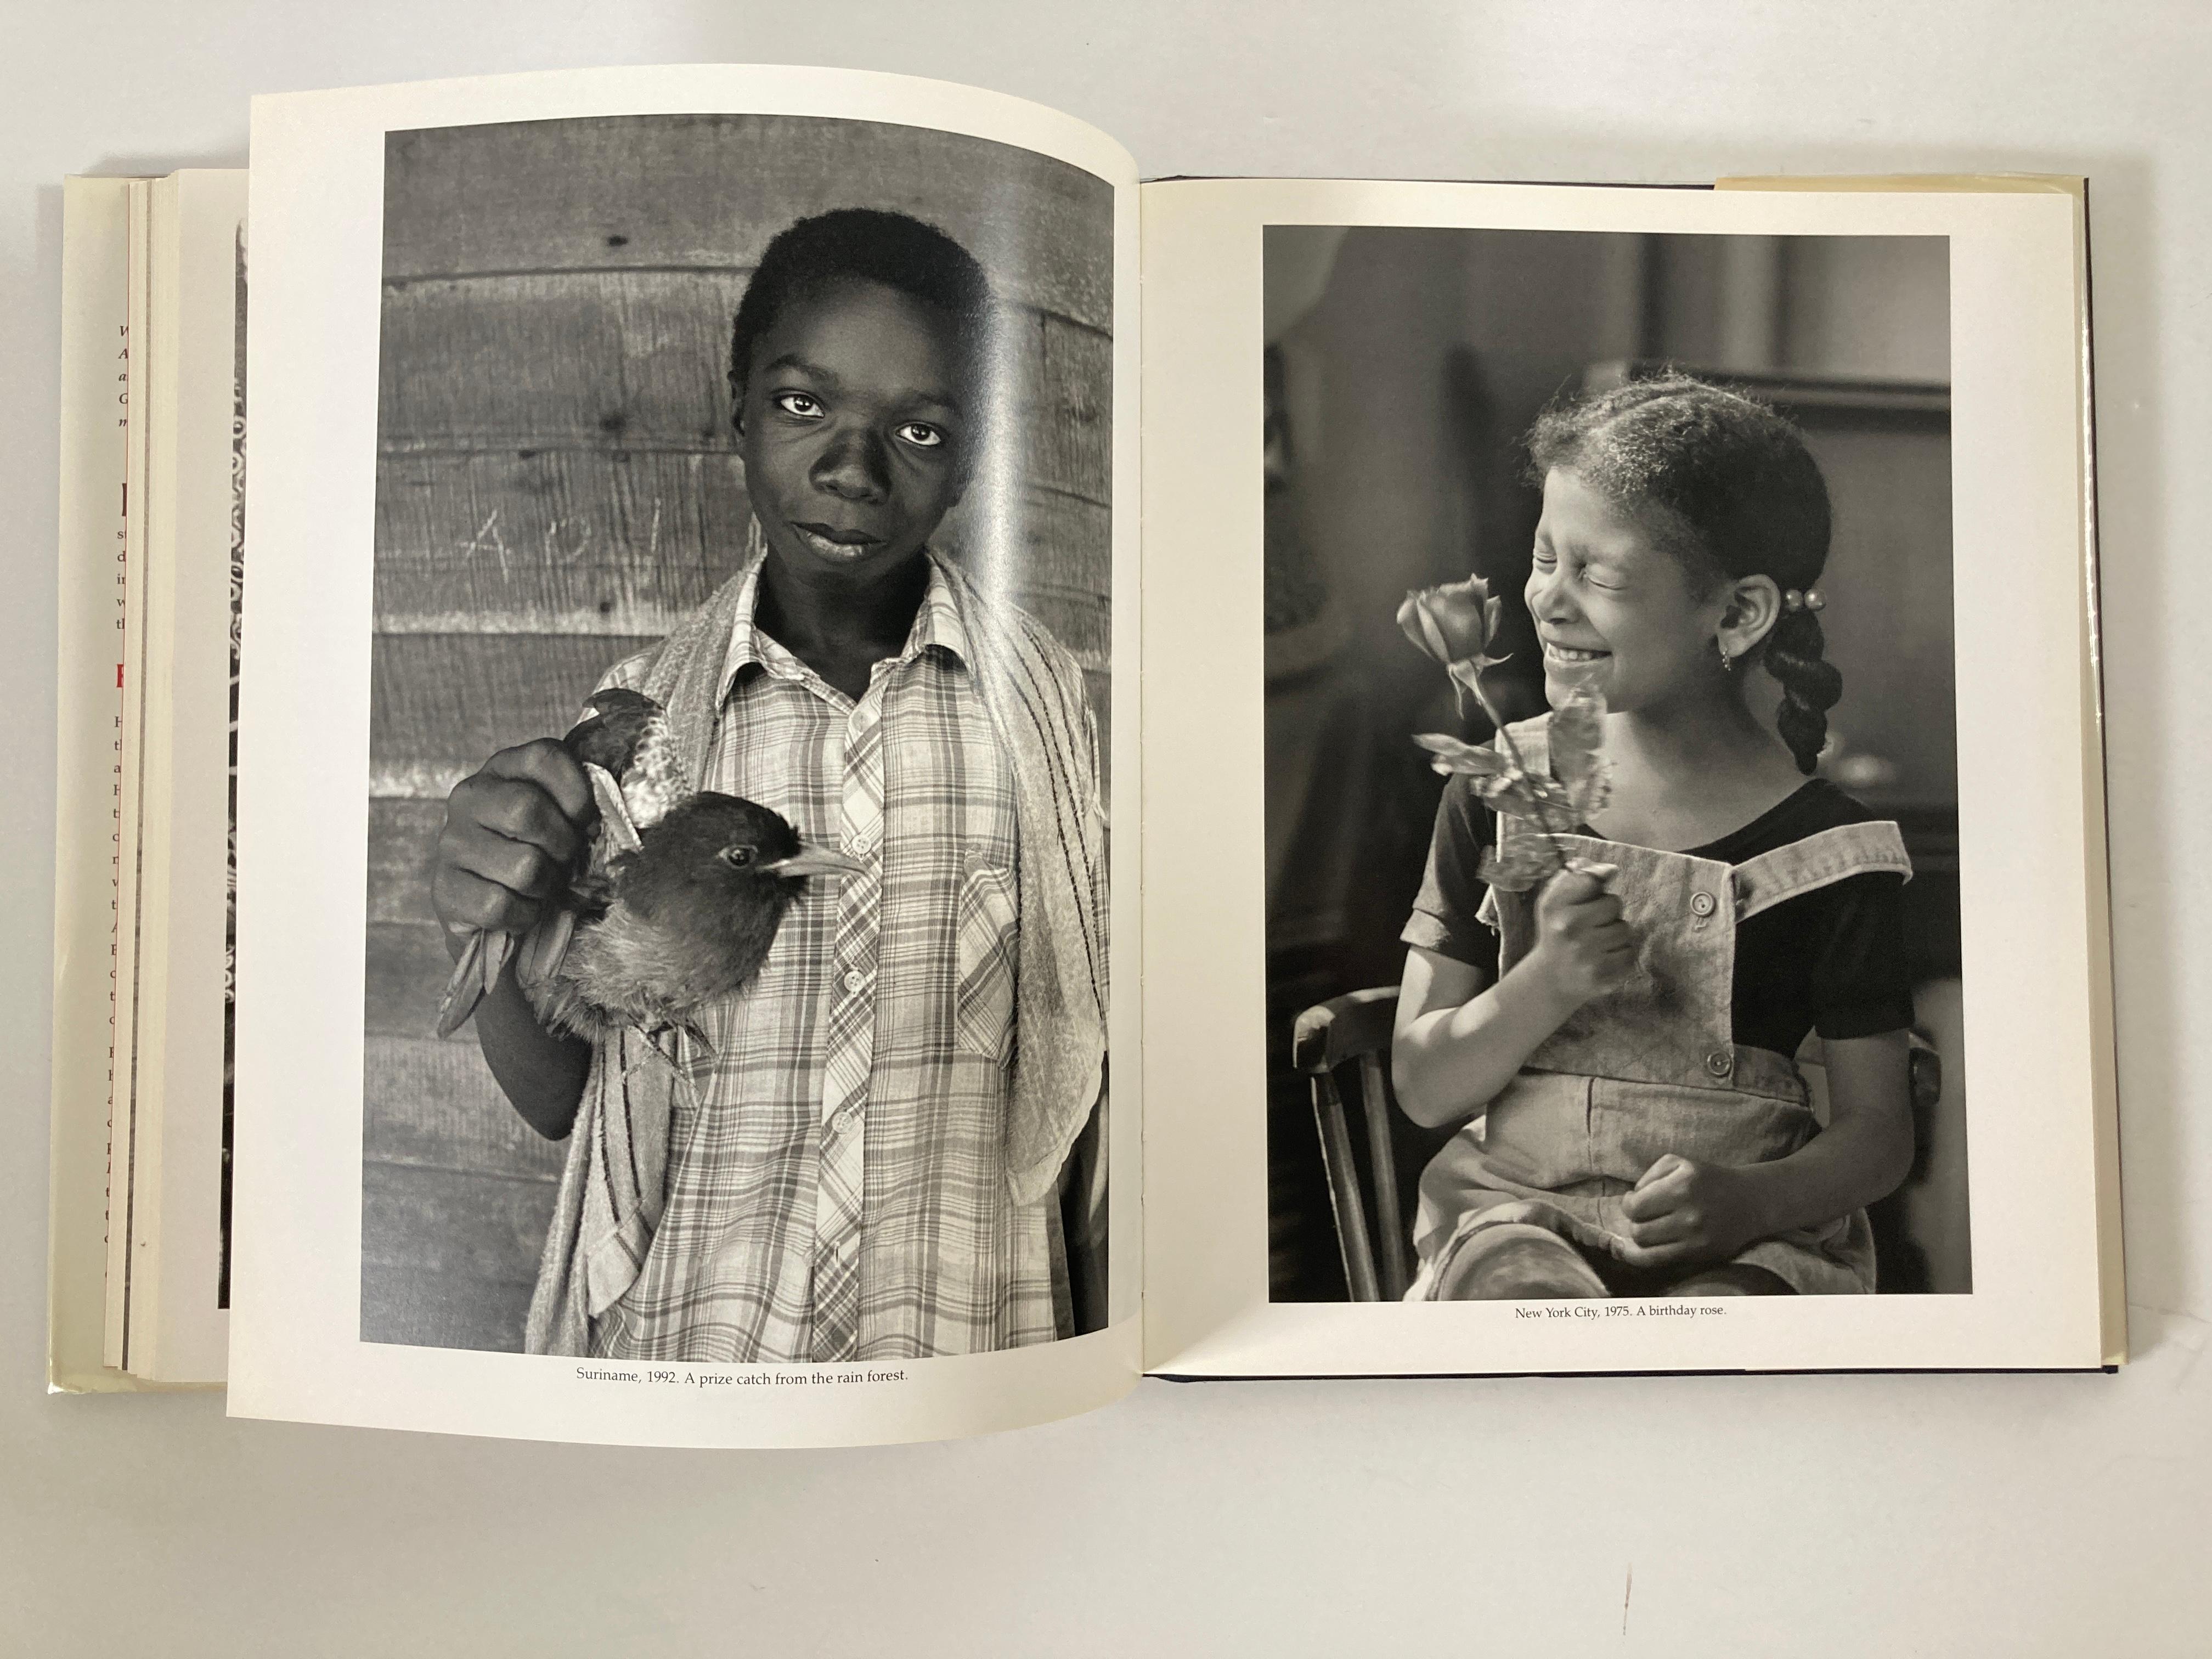 Feeling the Spirit: Searching the World for the People of Africa Livre en vente 8